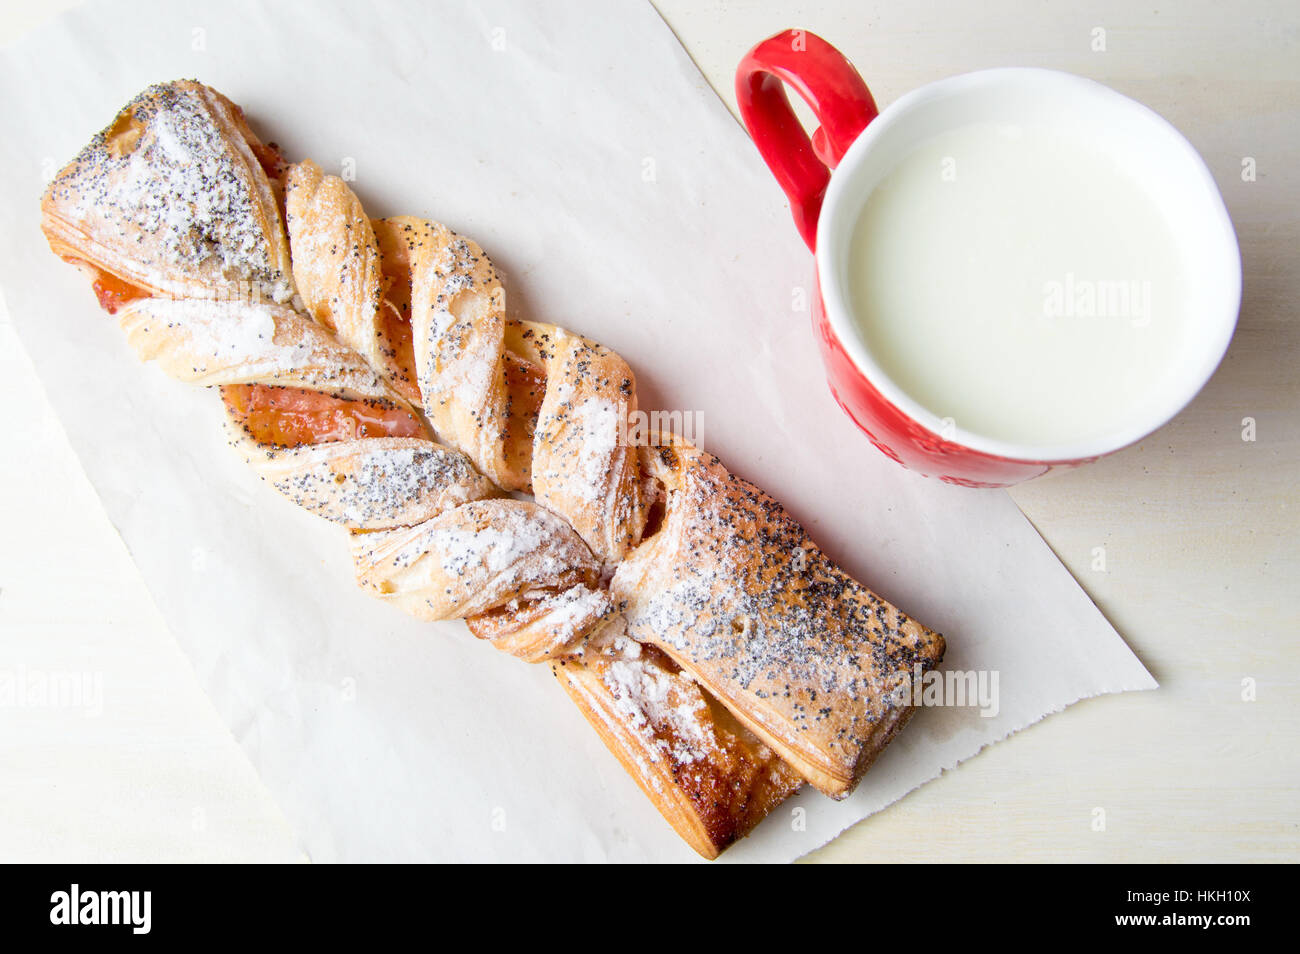 Braided puff pastry with jam and a glass of milk Stock Photo